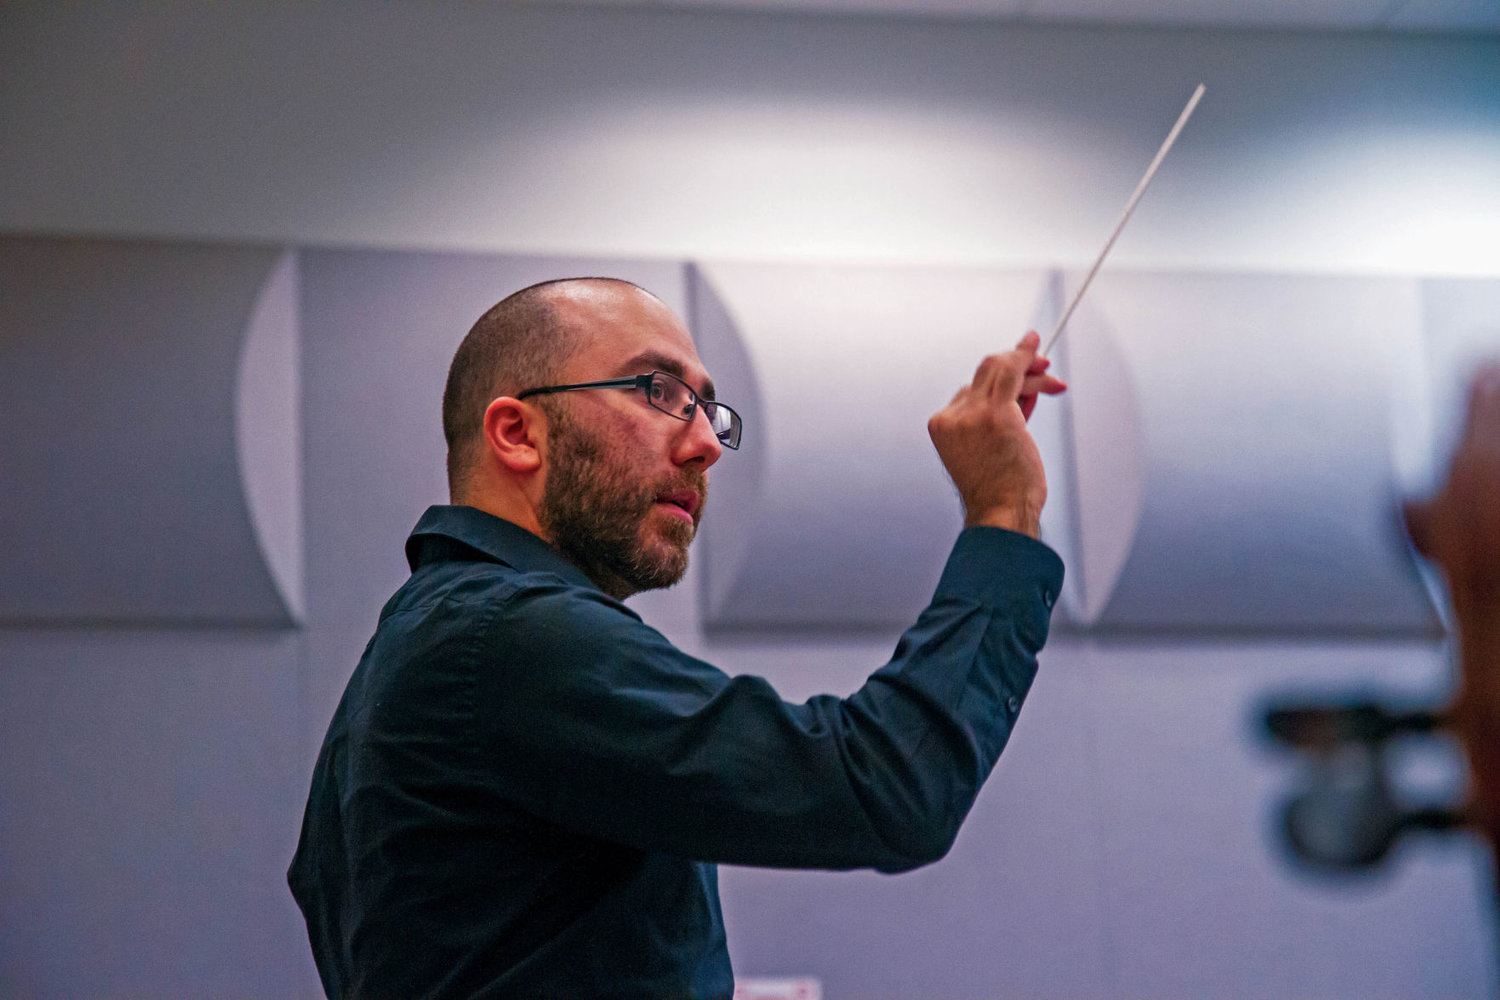 Tigran Arakelyan conducts the Port Townsend Community Orchestra during rehearsal Oct. 17. Photo by Katie Kowalski